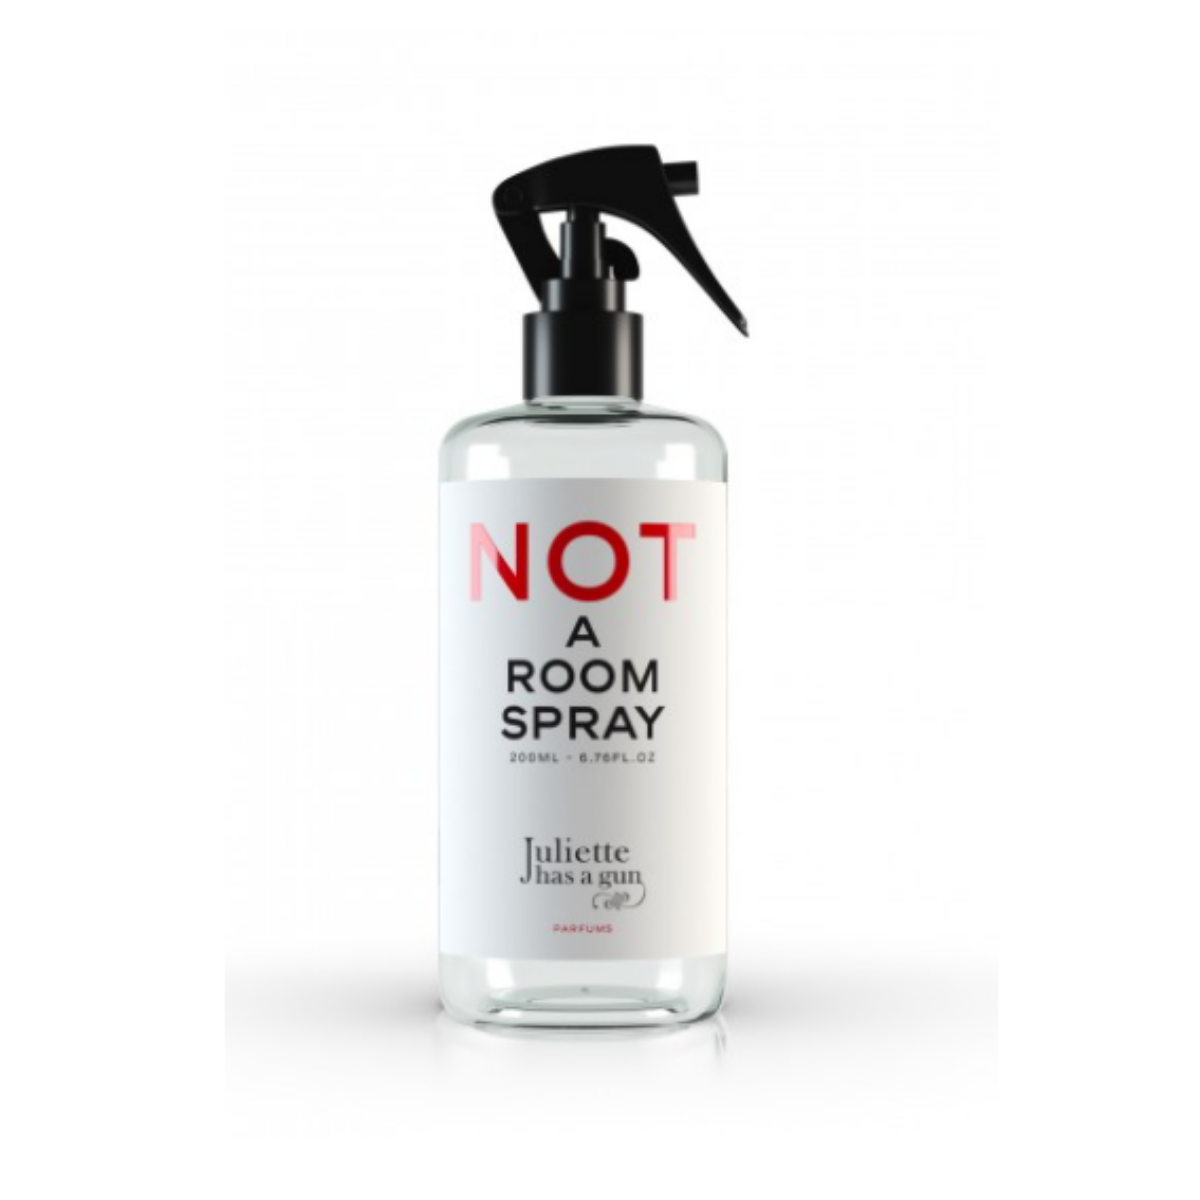 Primary image of Not A Room Spray